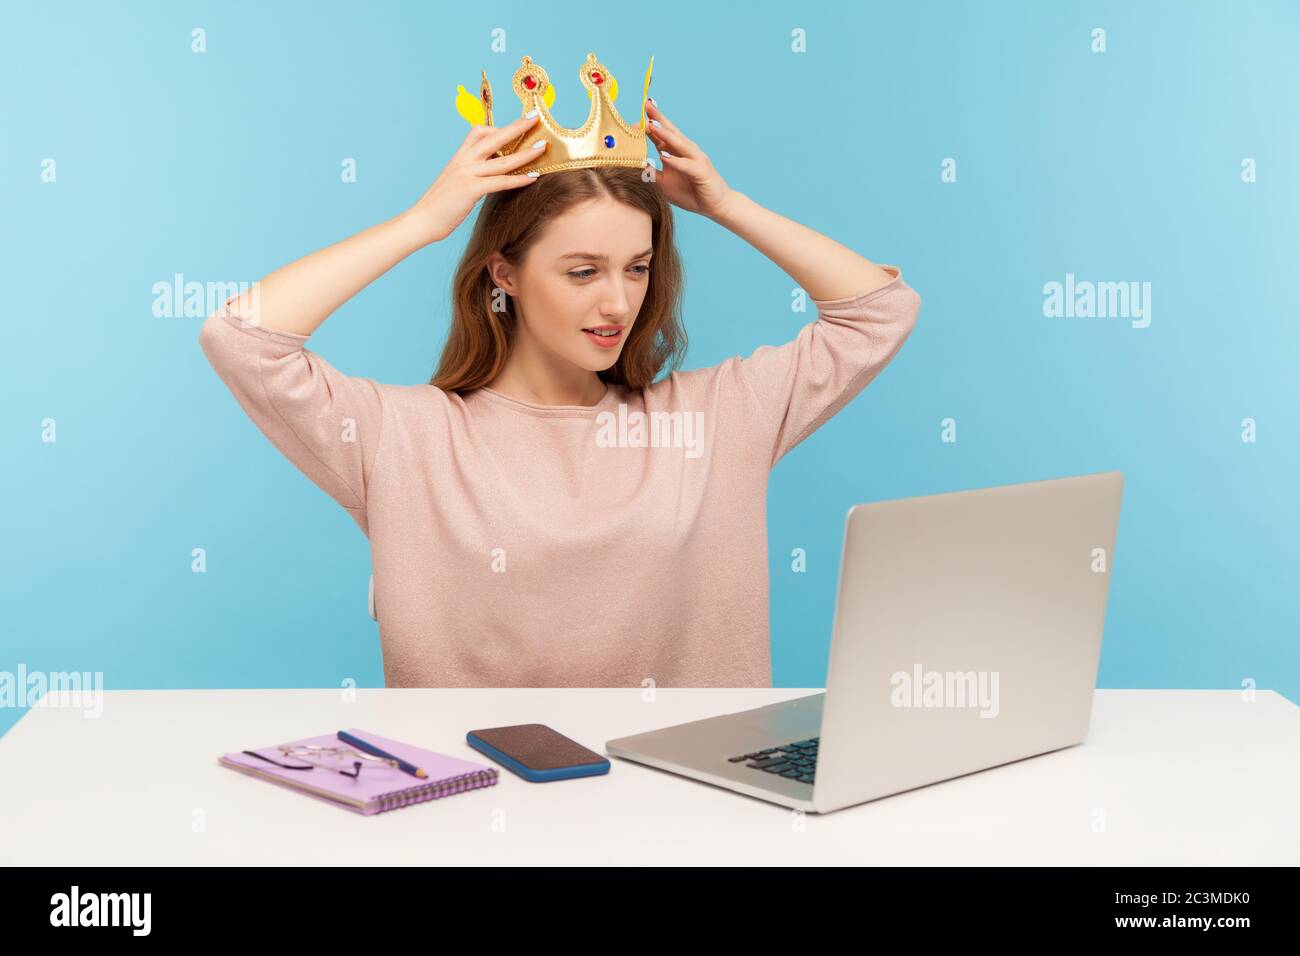 I am best queen. Arrogant self-confident ambitious businesswoman putting crown on head and looking at laptop screen, sitting in her office workplace. Stock Photo